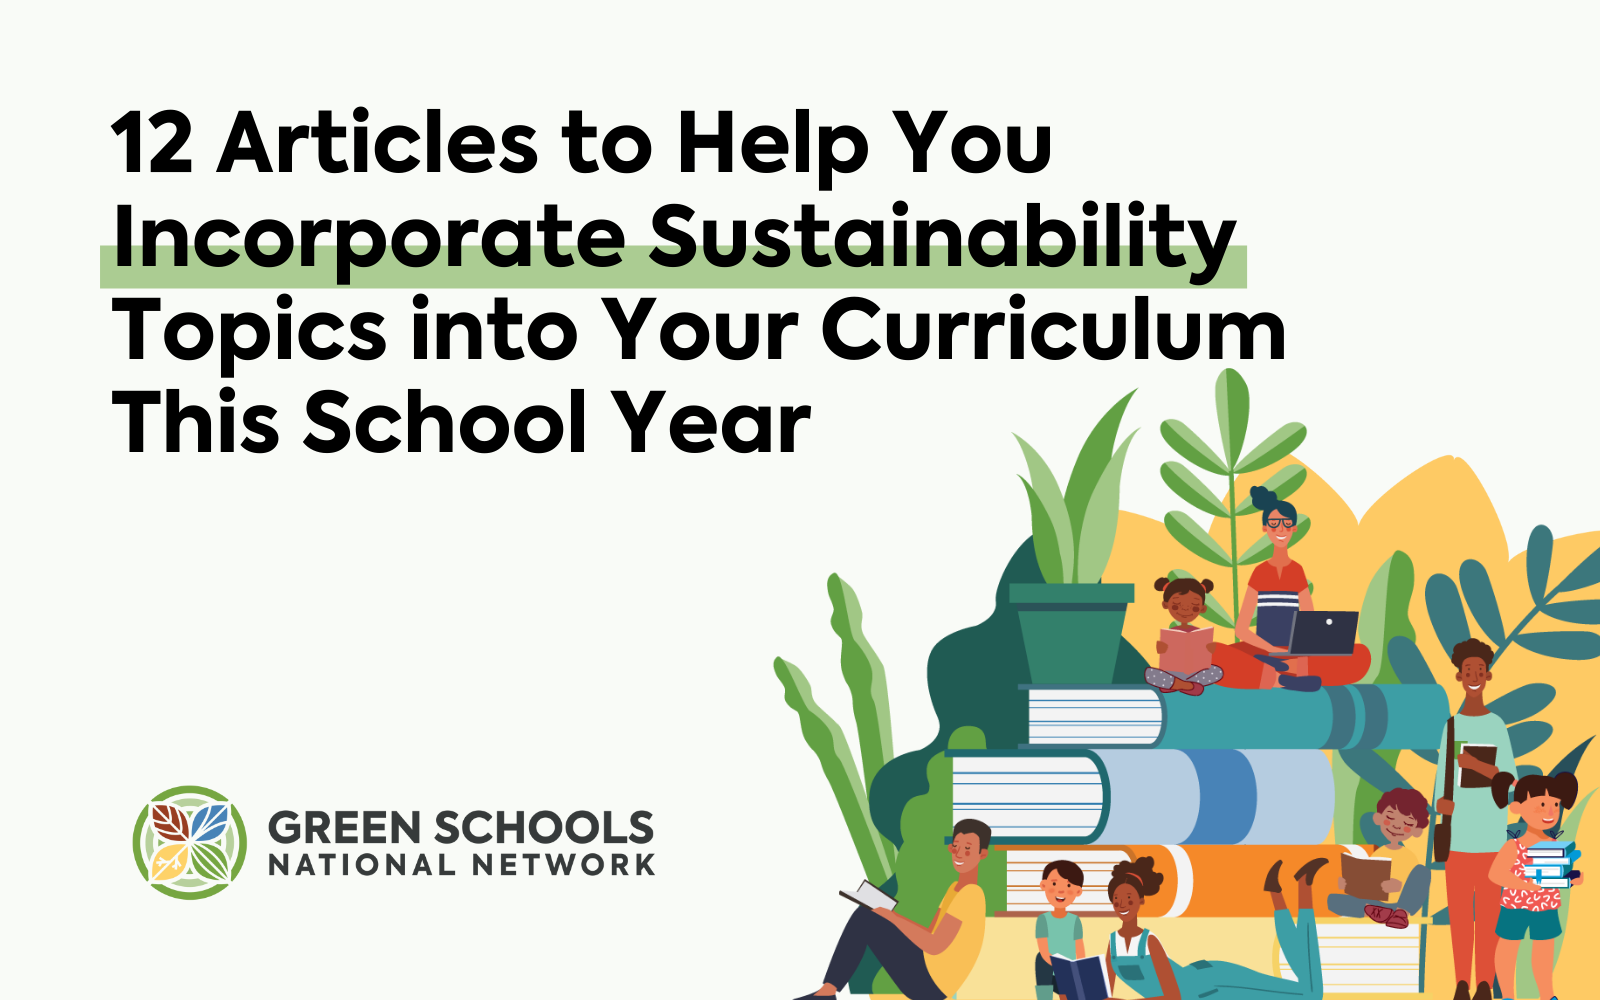 Incorporating sustainability education into science curriculum